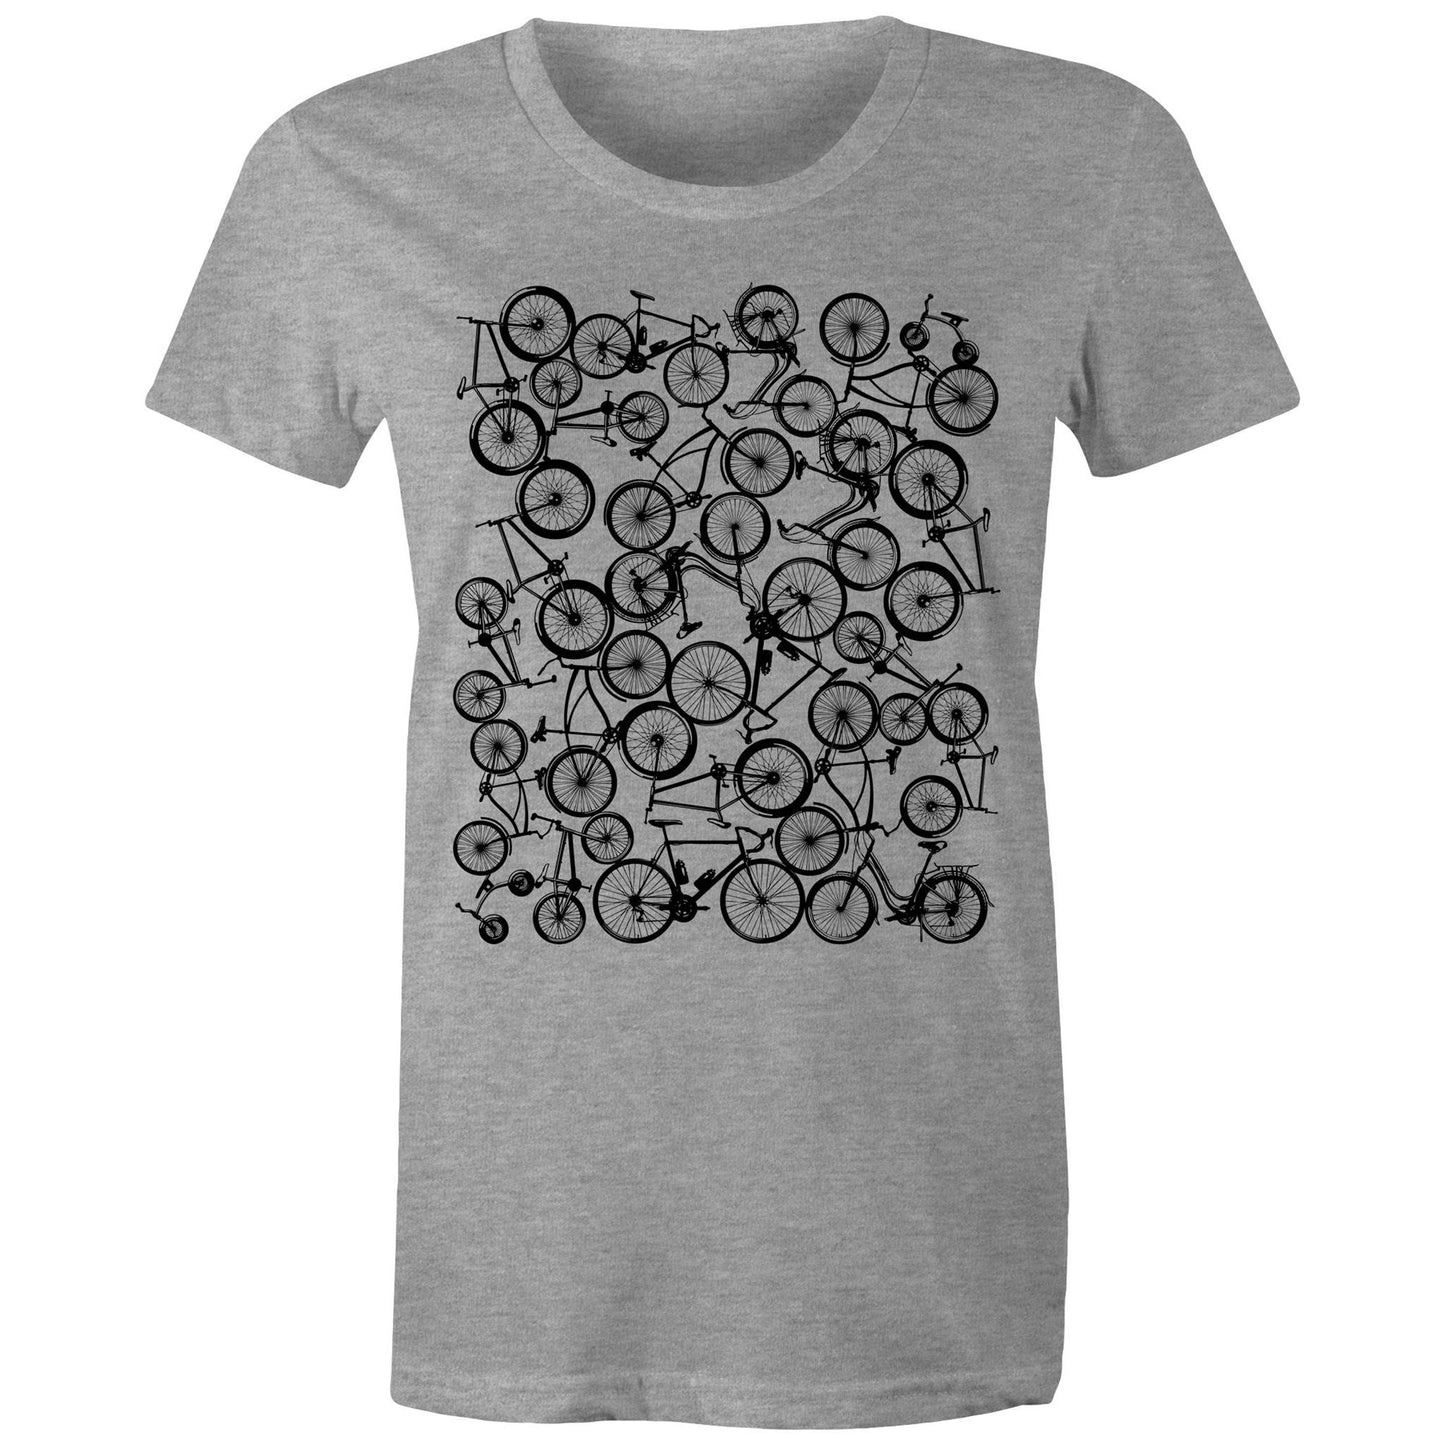 Pile of Bicycles - Women's T-Shirt